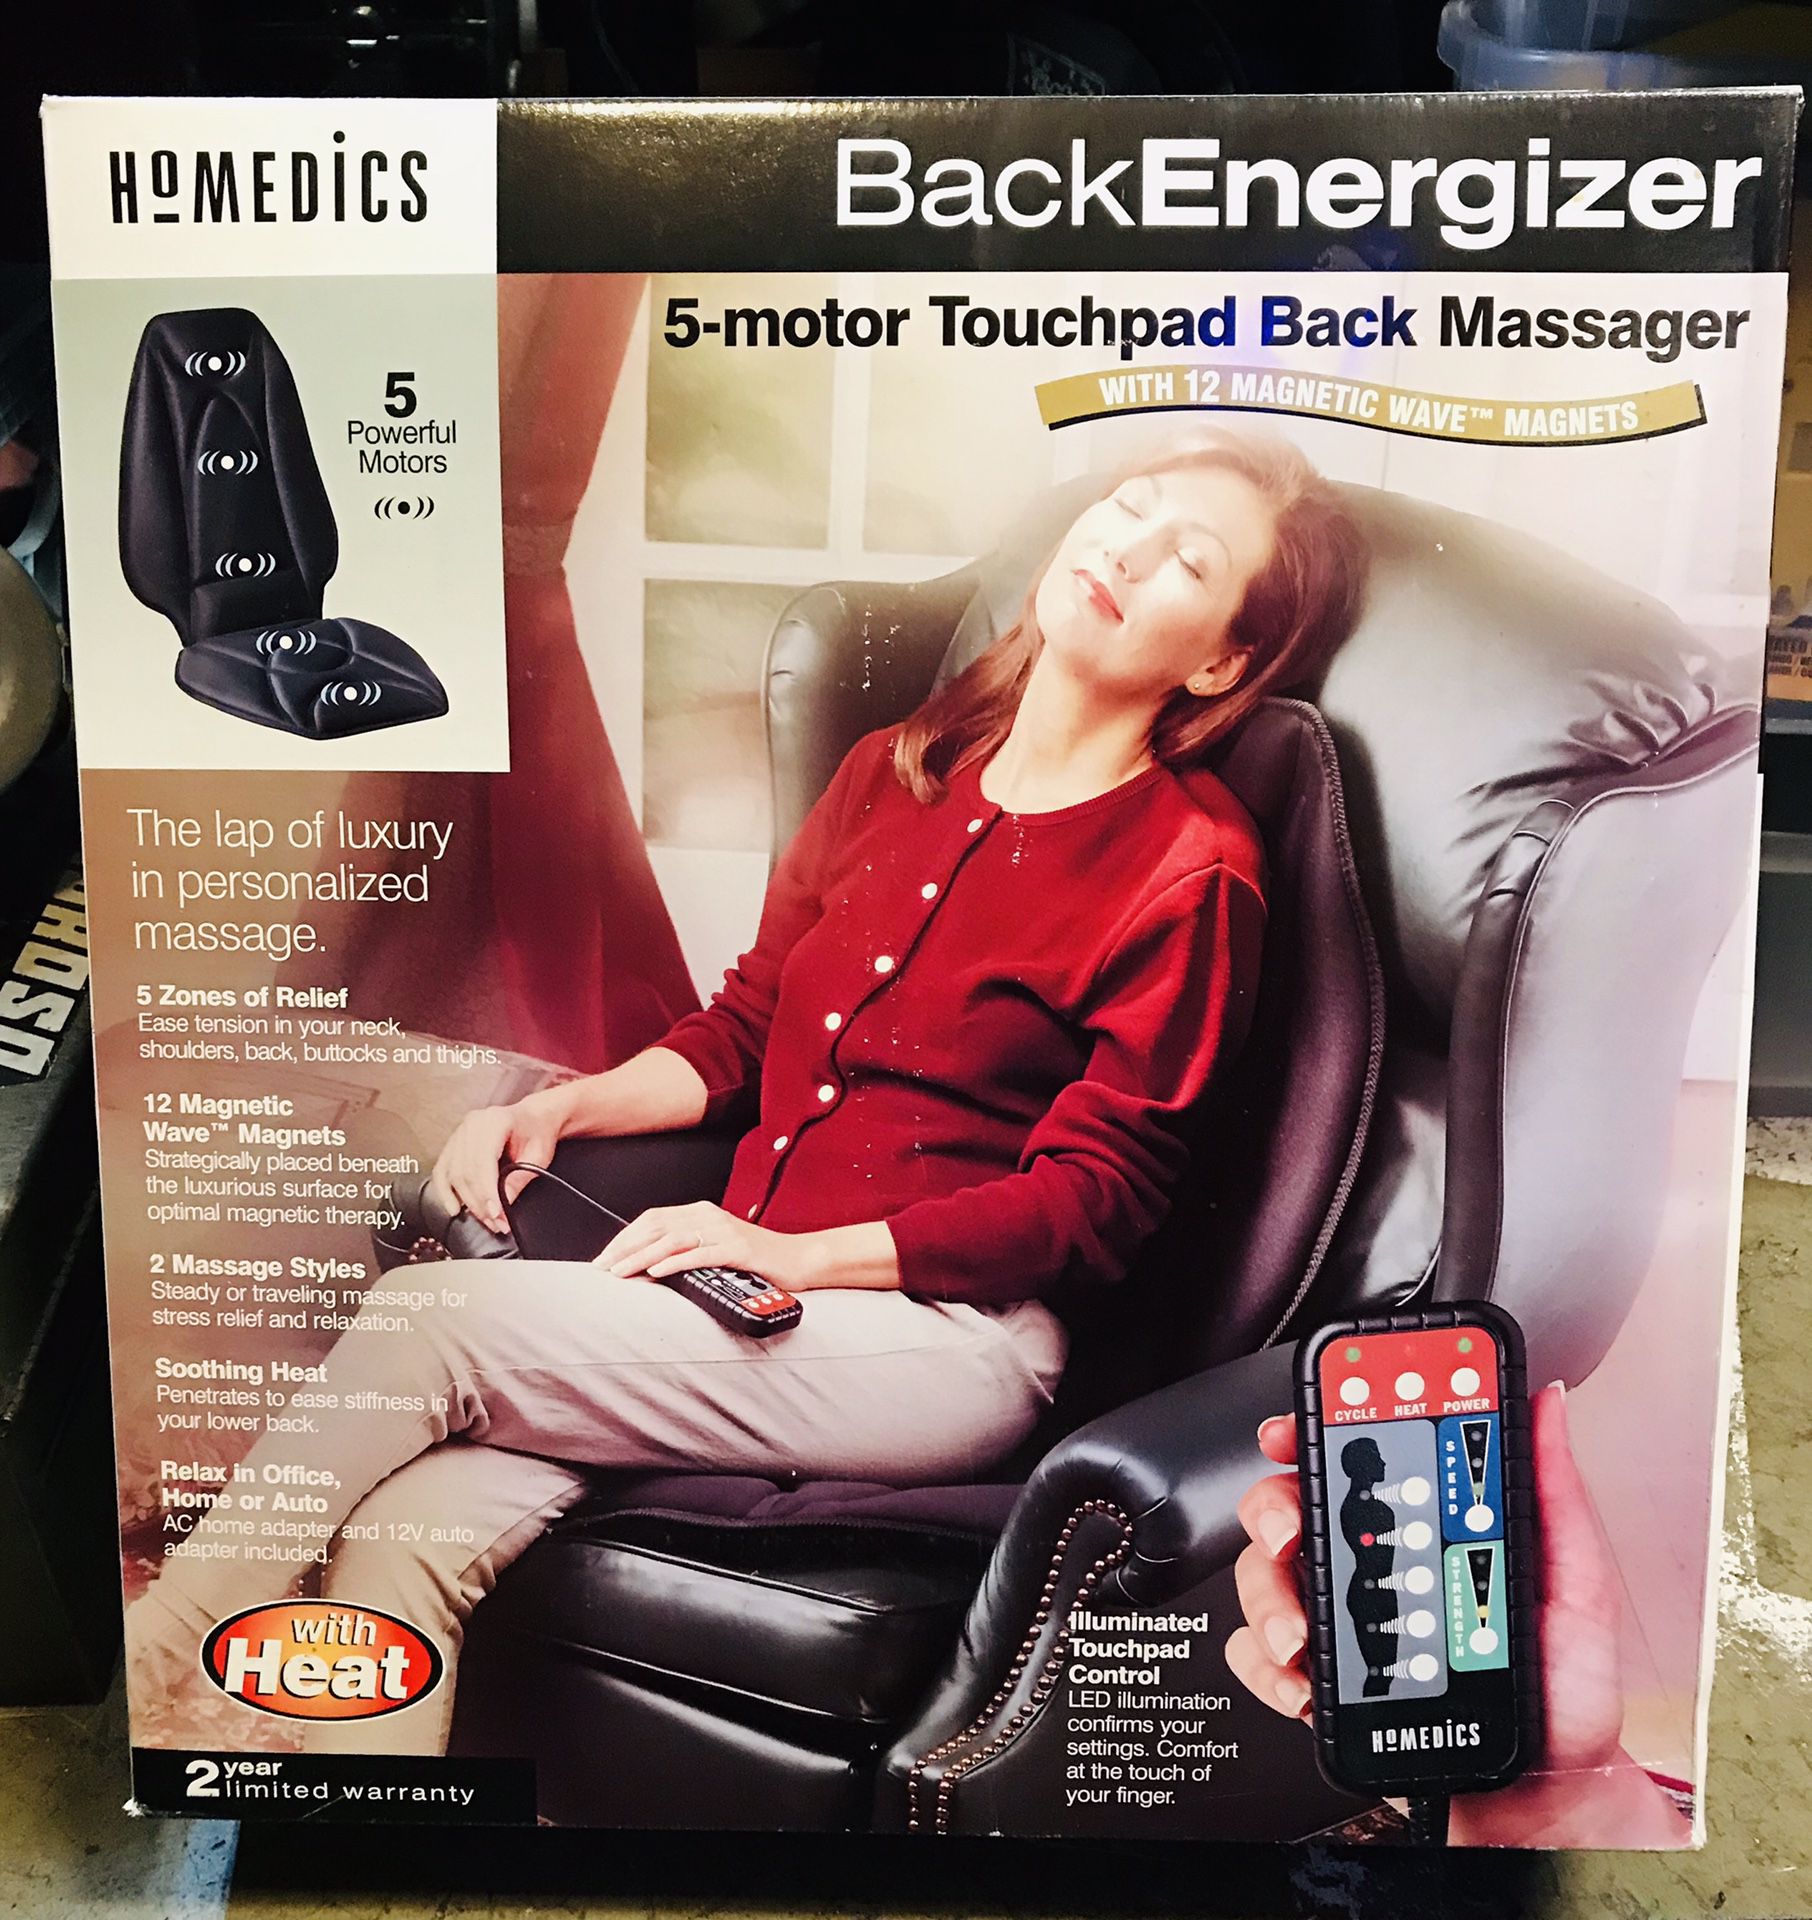 Brand New - Unopened* Homedics -5 Motor -Touchpad -Heated -Back Massager  for Sale in Kent, WA - OfferUp